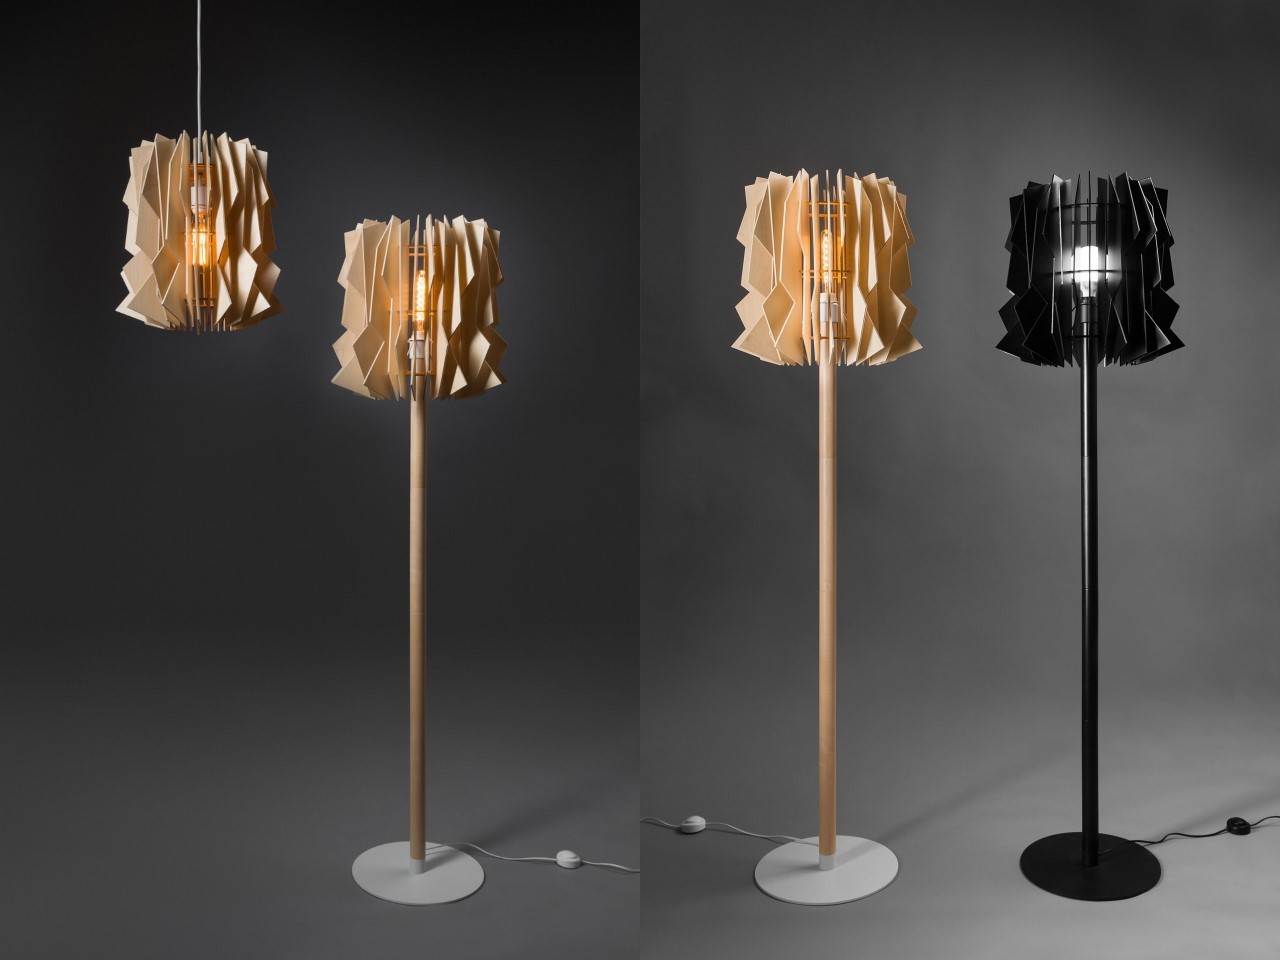 These laser-cut flat-packed wood panels assemble into a beautifully edgy  tornado-inspired lampshade - Yanko Design